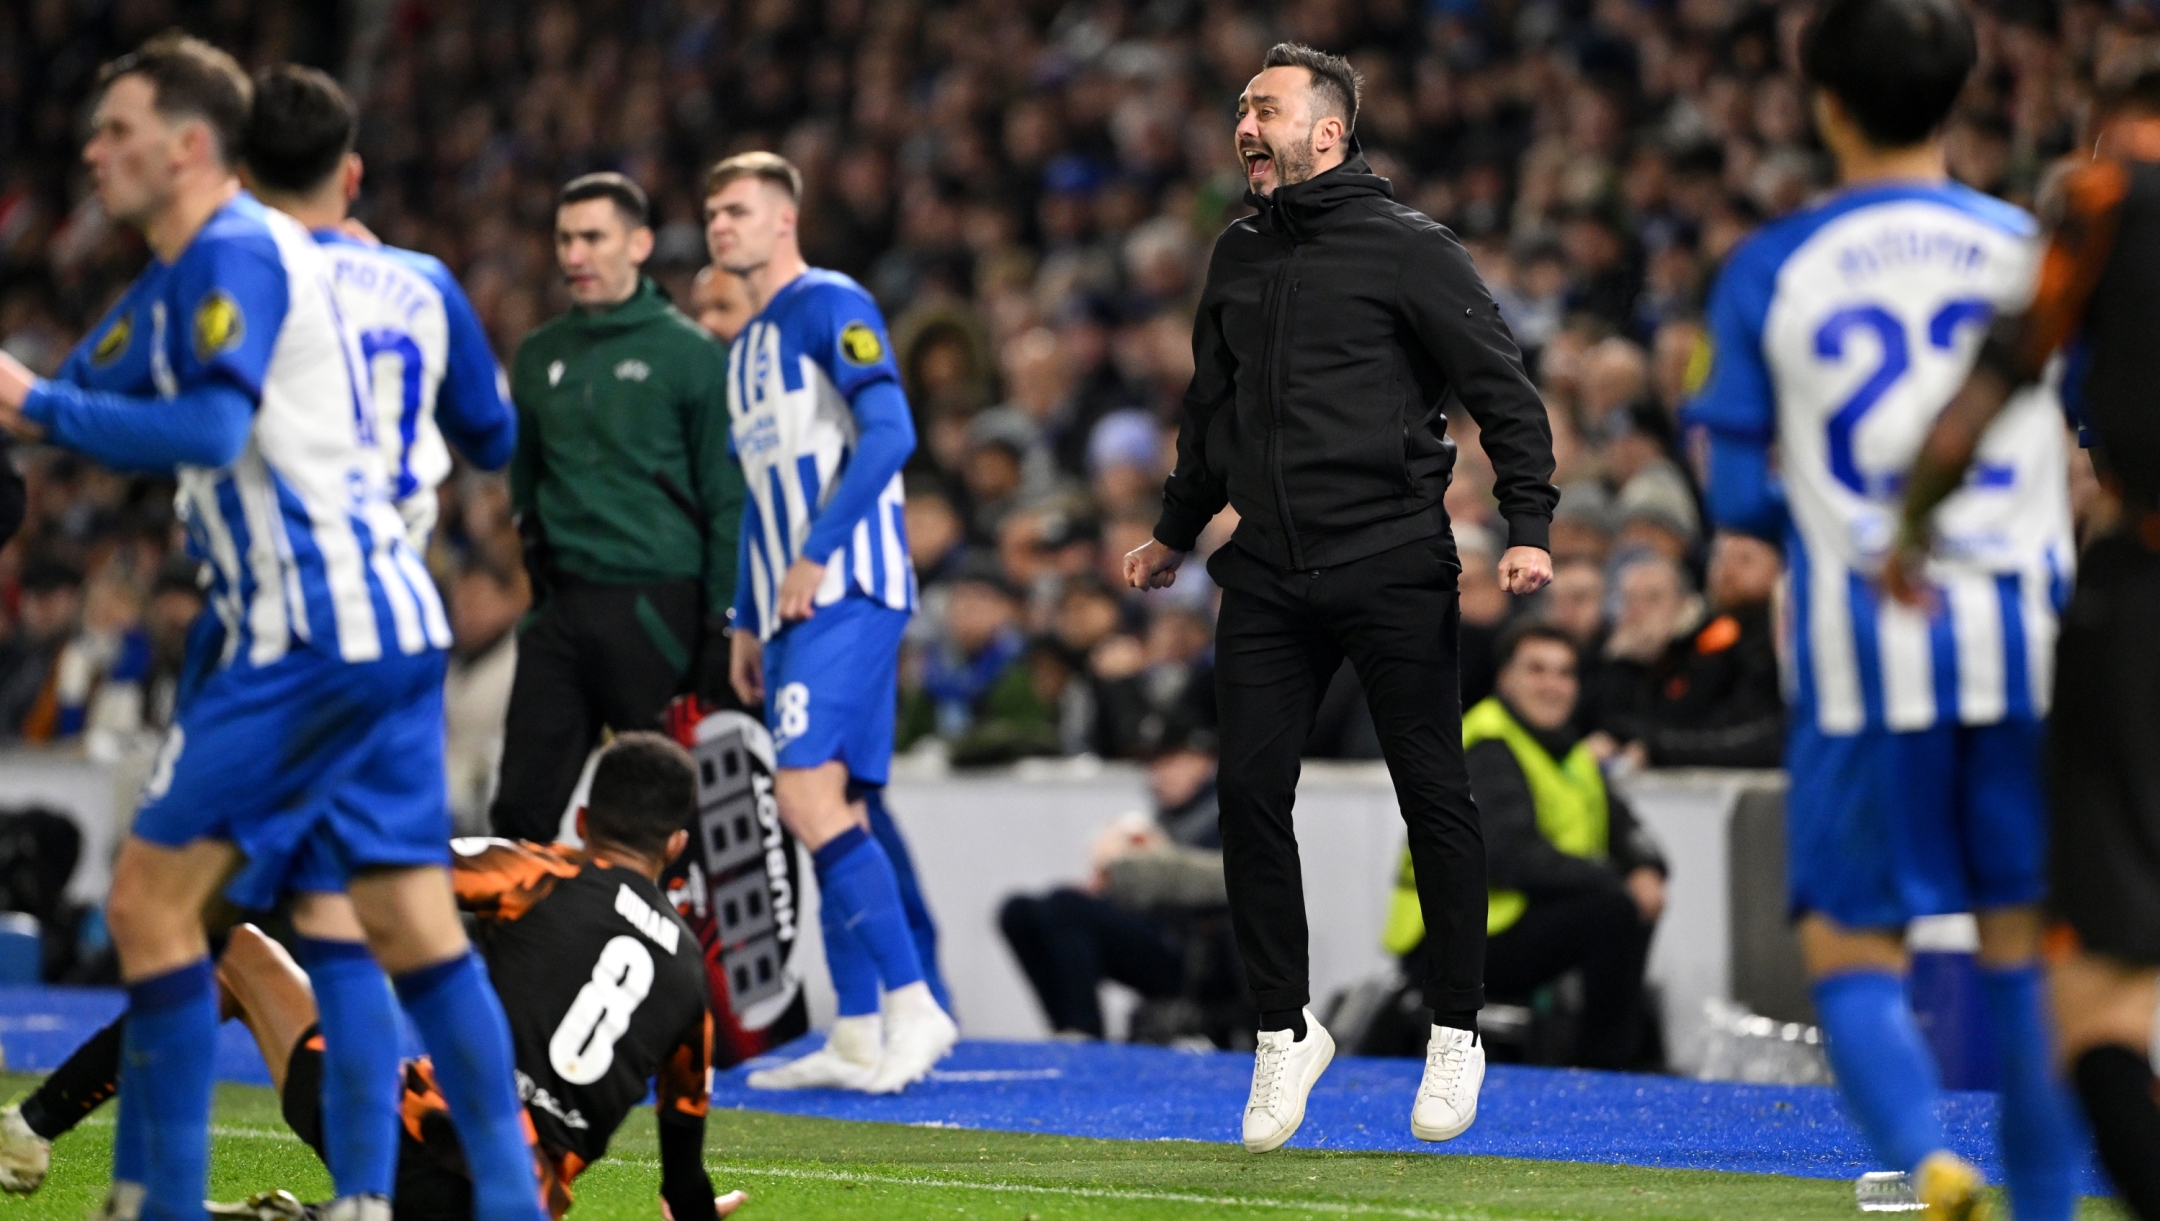 BRIGHTON, ENGLAND - DECEMBER 14: Roberto De Zerbi, Manager of Brighton & Hove Albion, reacts during the UEFA Europa League match between Brighton & Hove Albion v Olympique de Marseille at American Express Community Stadium on December 14, 2023 in Brighton, England. (Photo by Mike Hewitt/Getty Images)